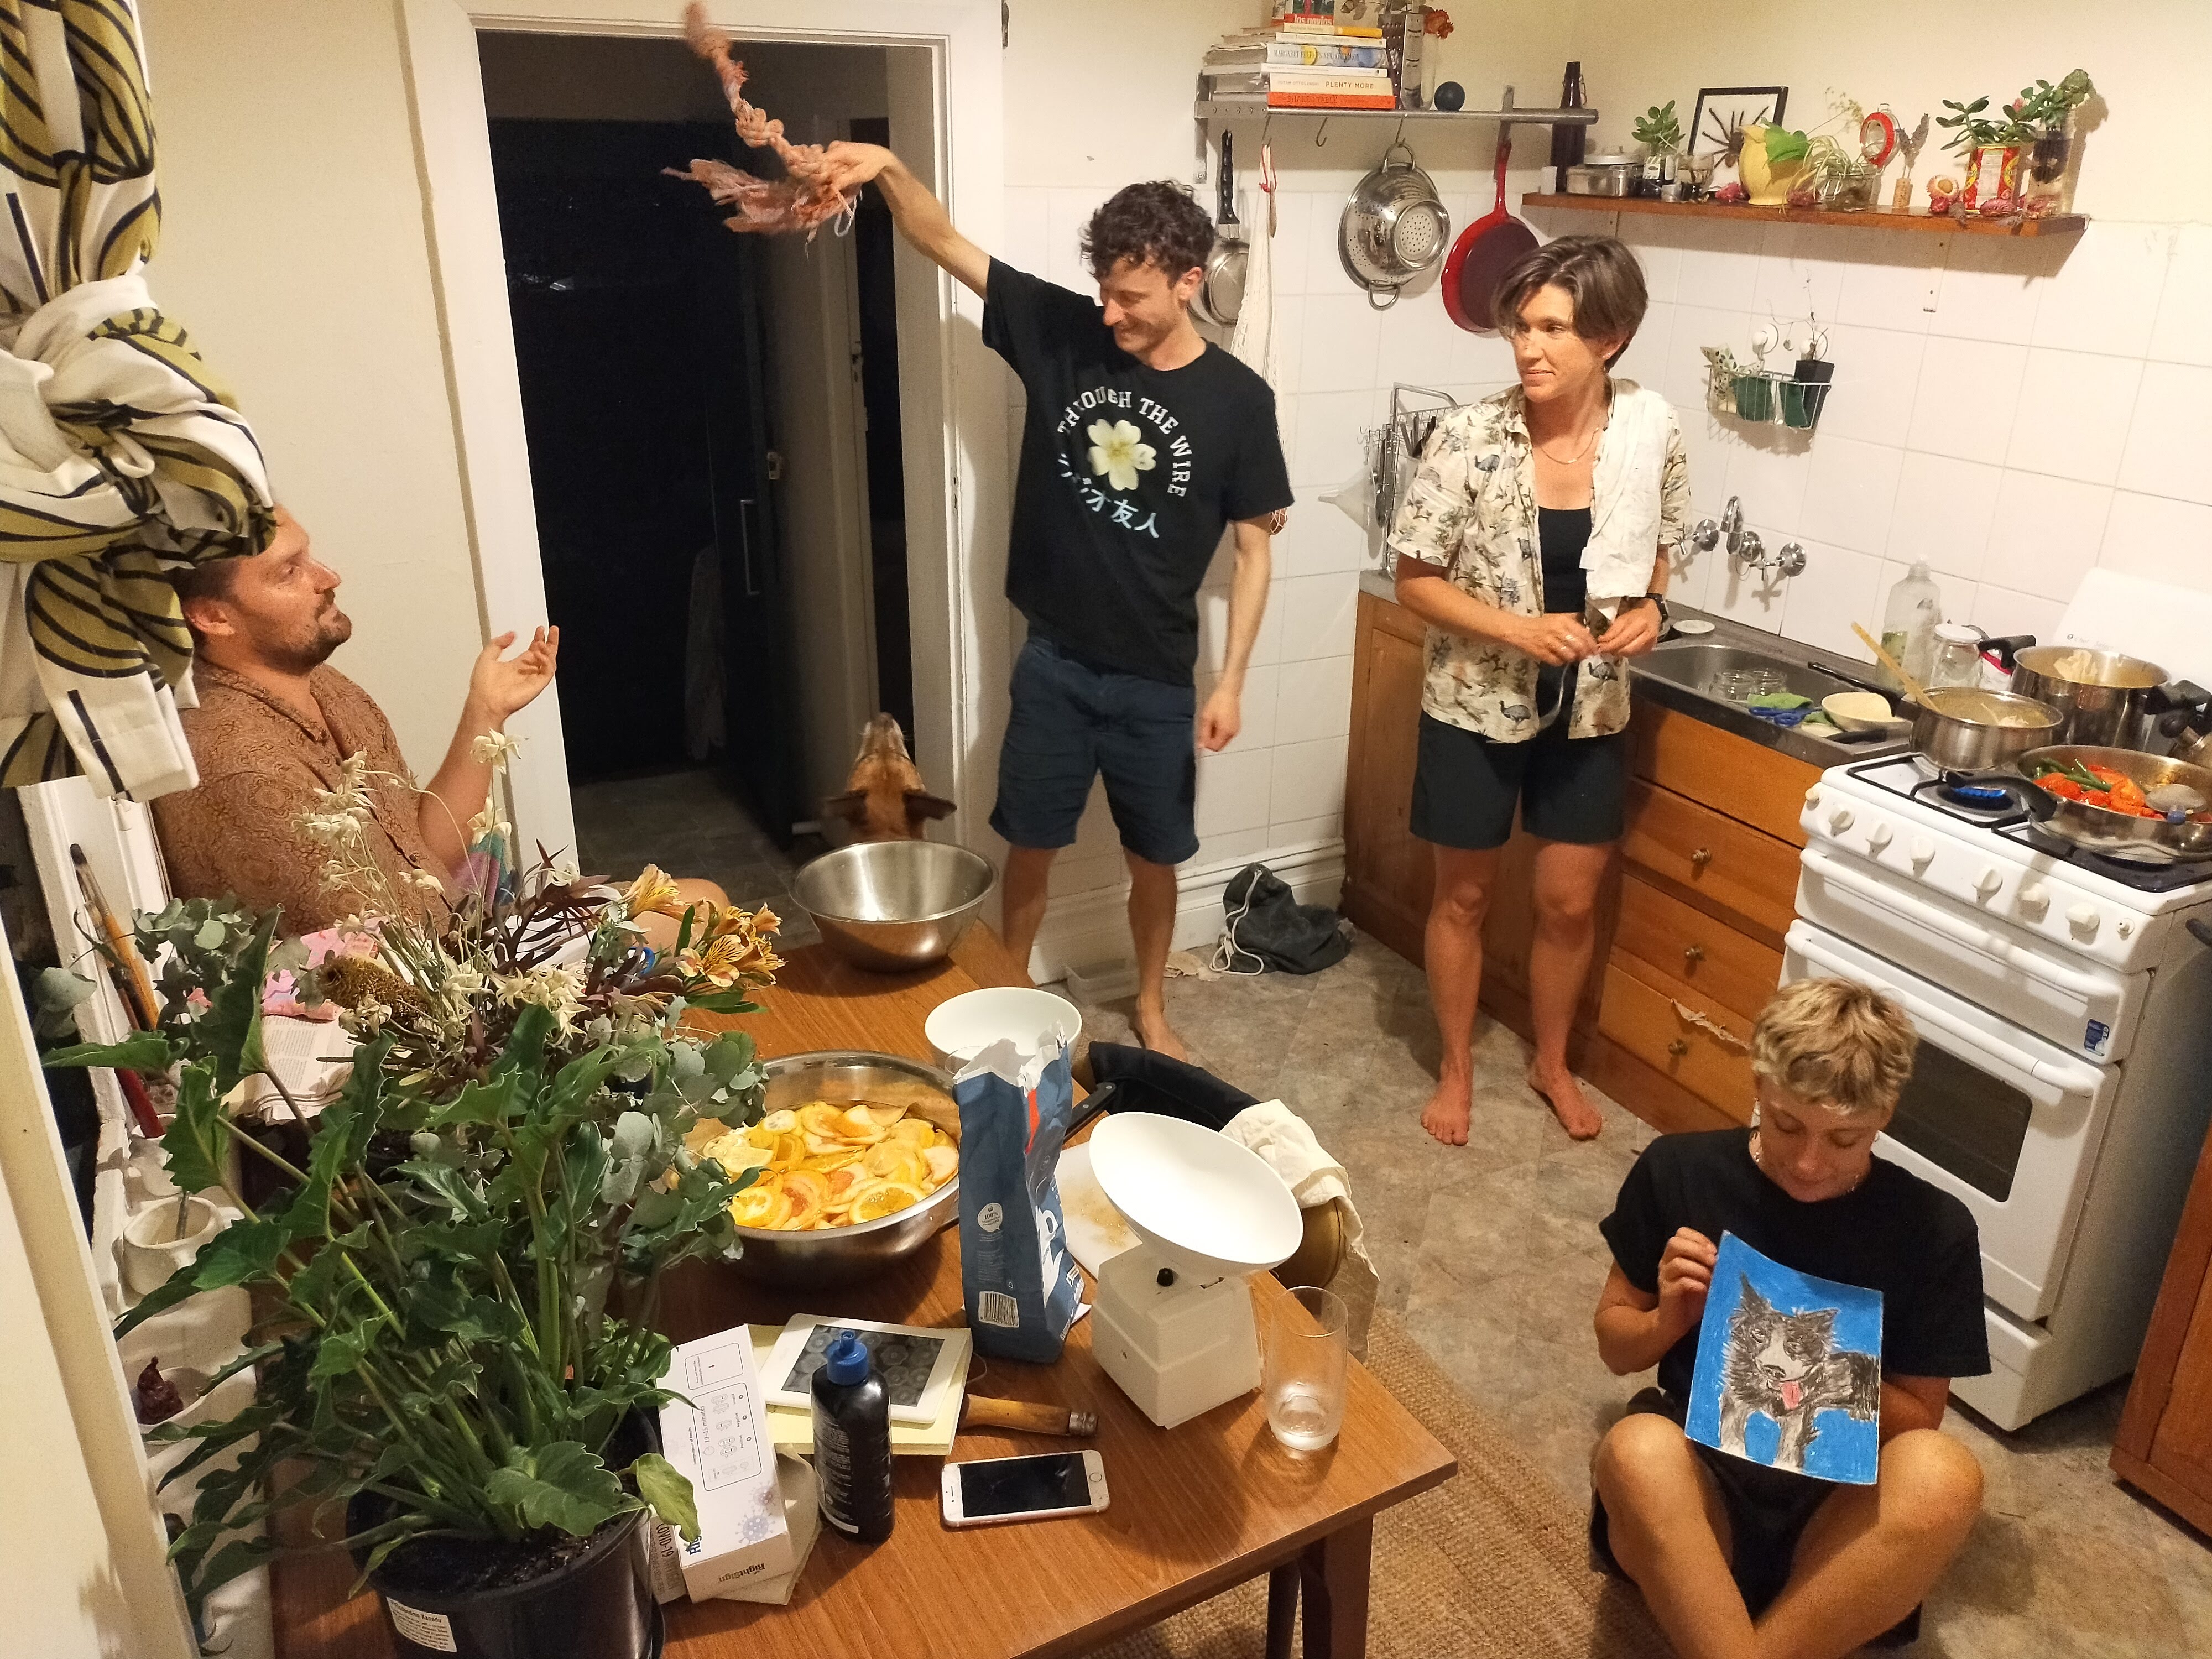 A group of people in a kitchen